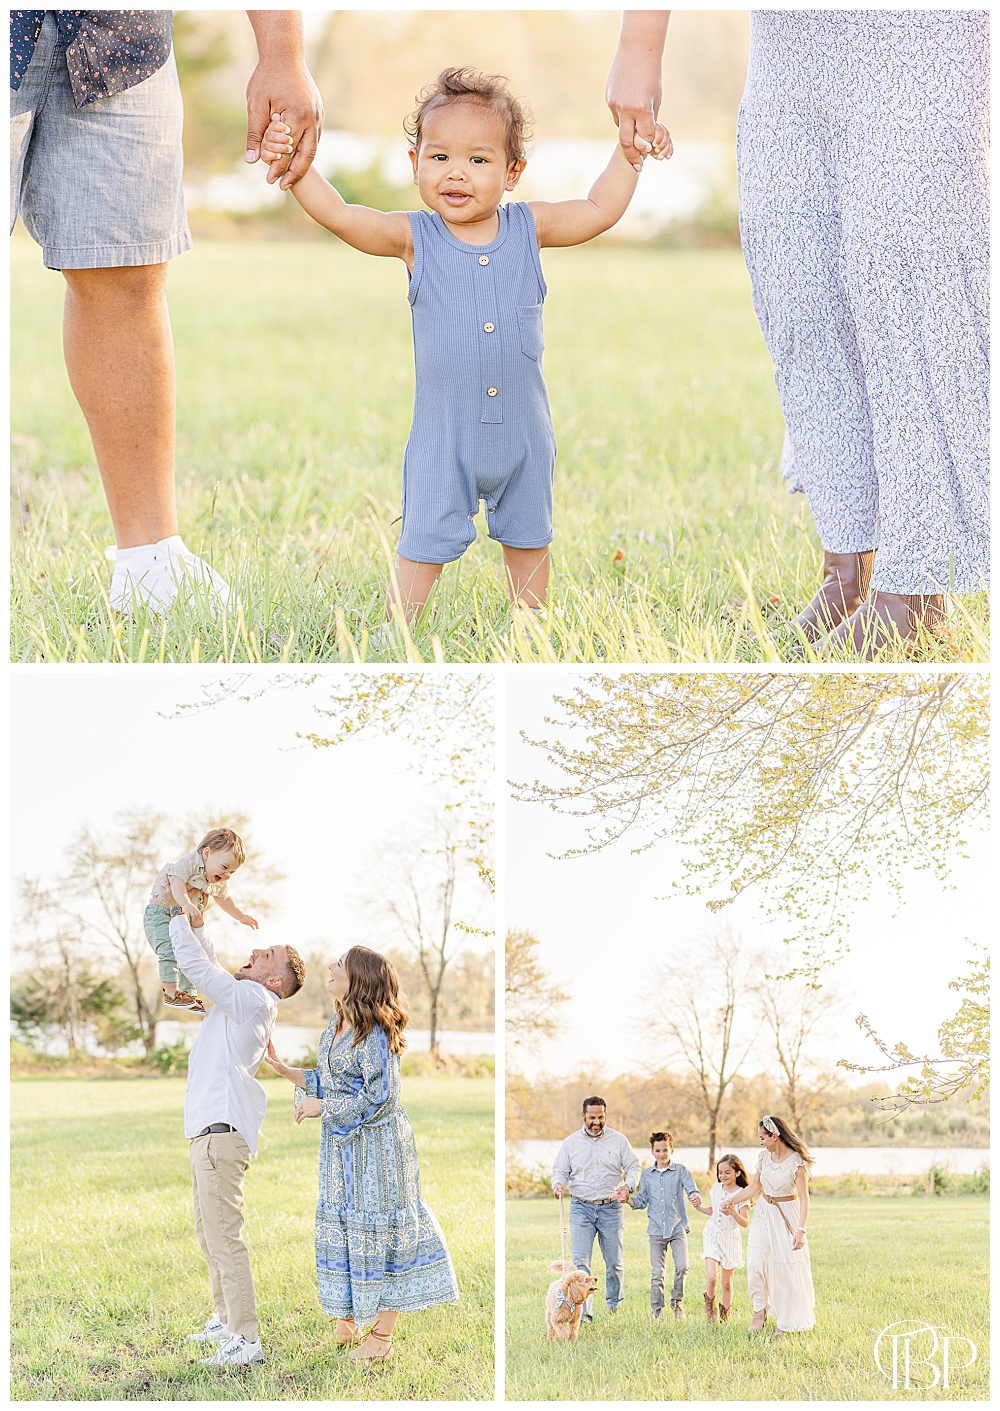 Families in blue at the park for their Haymarket, Virginia spring mini sessions taken by TuBelle Photography.